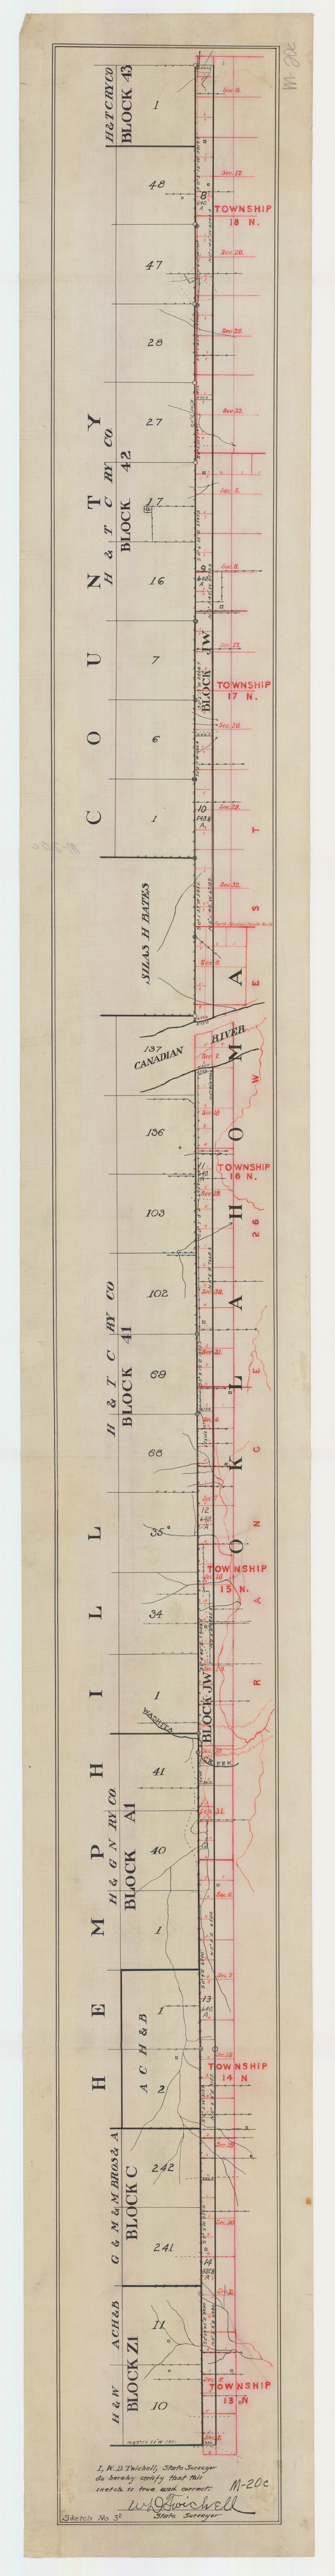 89664, [Sketch Between Hemphill County and Oklahoma], Twichell Survey Records